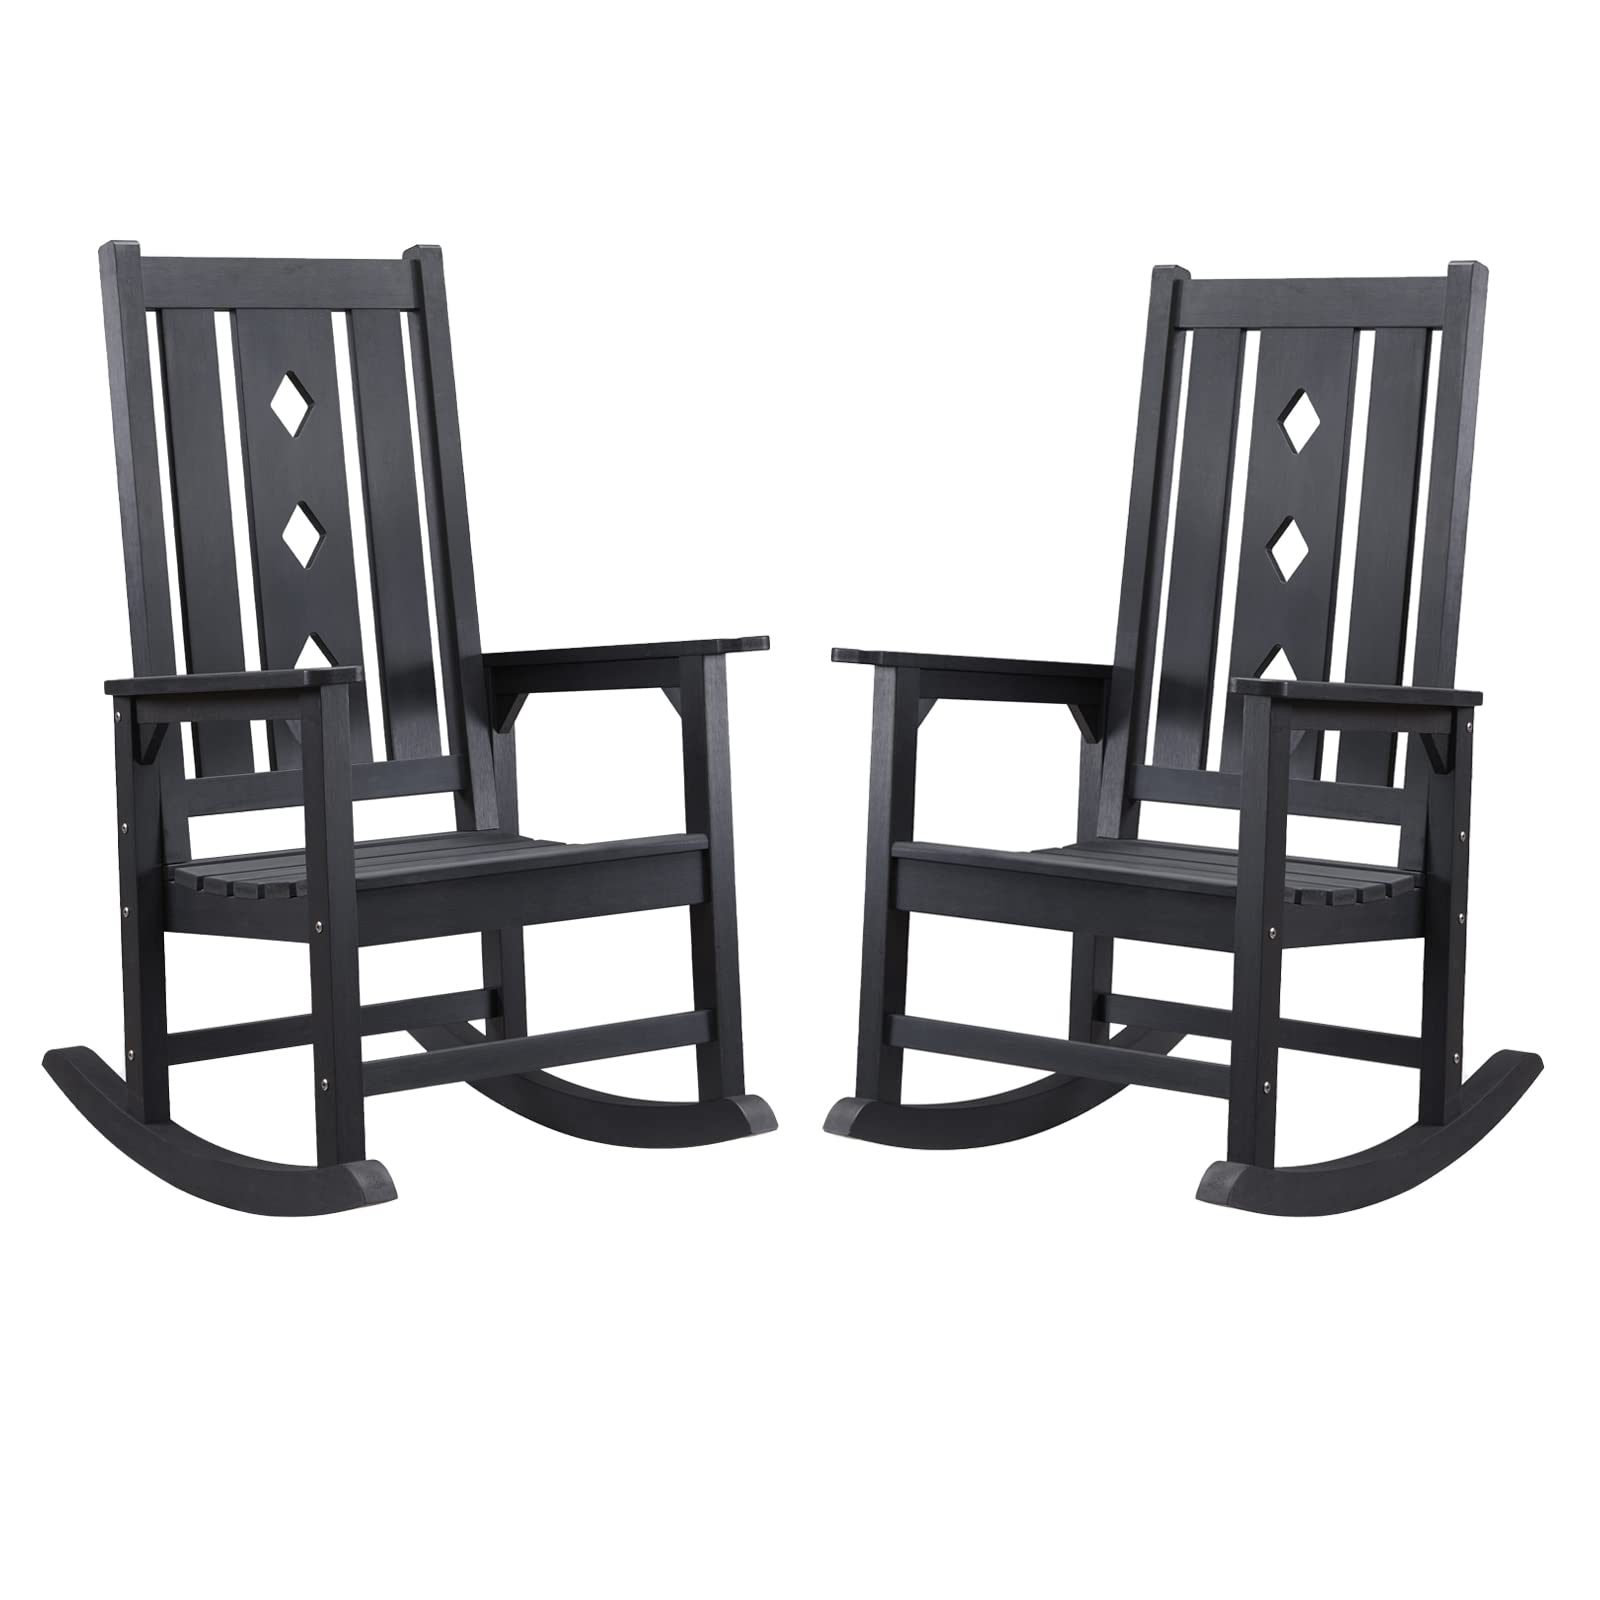 EFURDEN Rocking Chair Set of 2, Weather Resistant Patio Rocker for Adults, Smooth Rocking Chair Indoor and Outdoor,350lbs Load (Black)